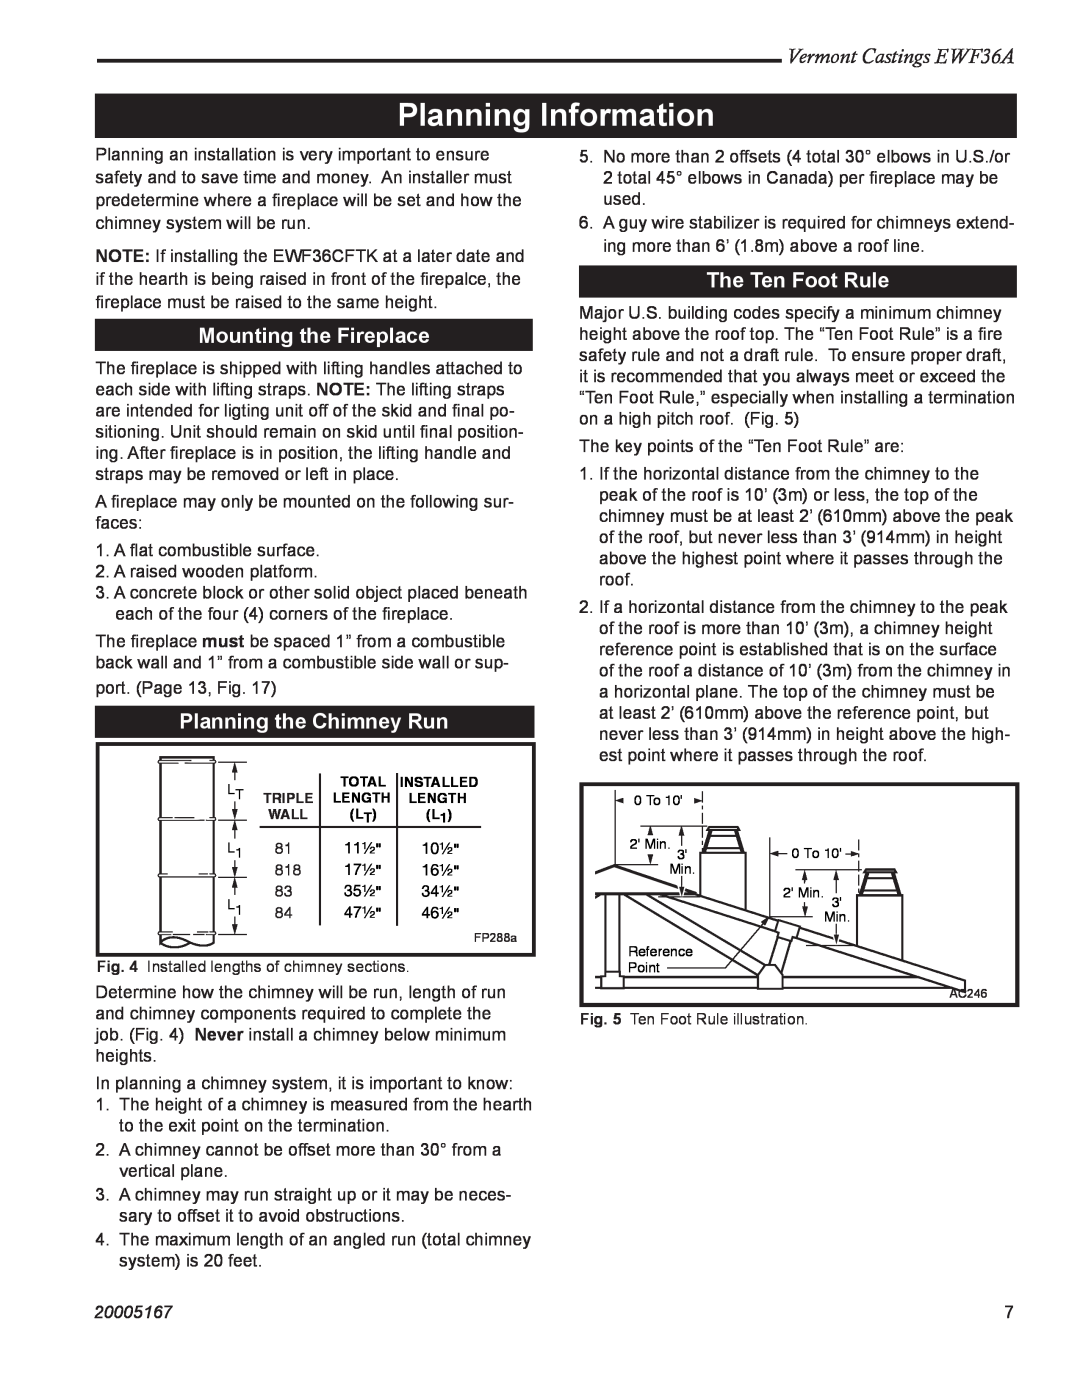 MHP EWF36A manual Planning Information, Mounting the Fireplace, Planning the Chimney Run, The Ten Foot Rule, 20005167 